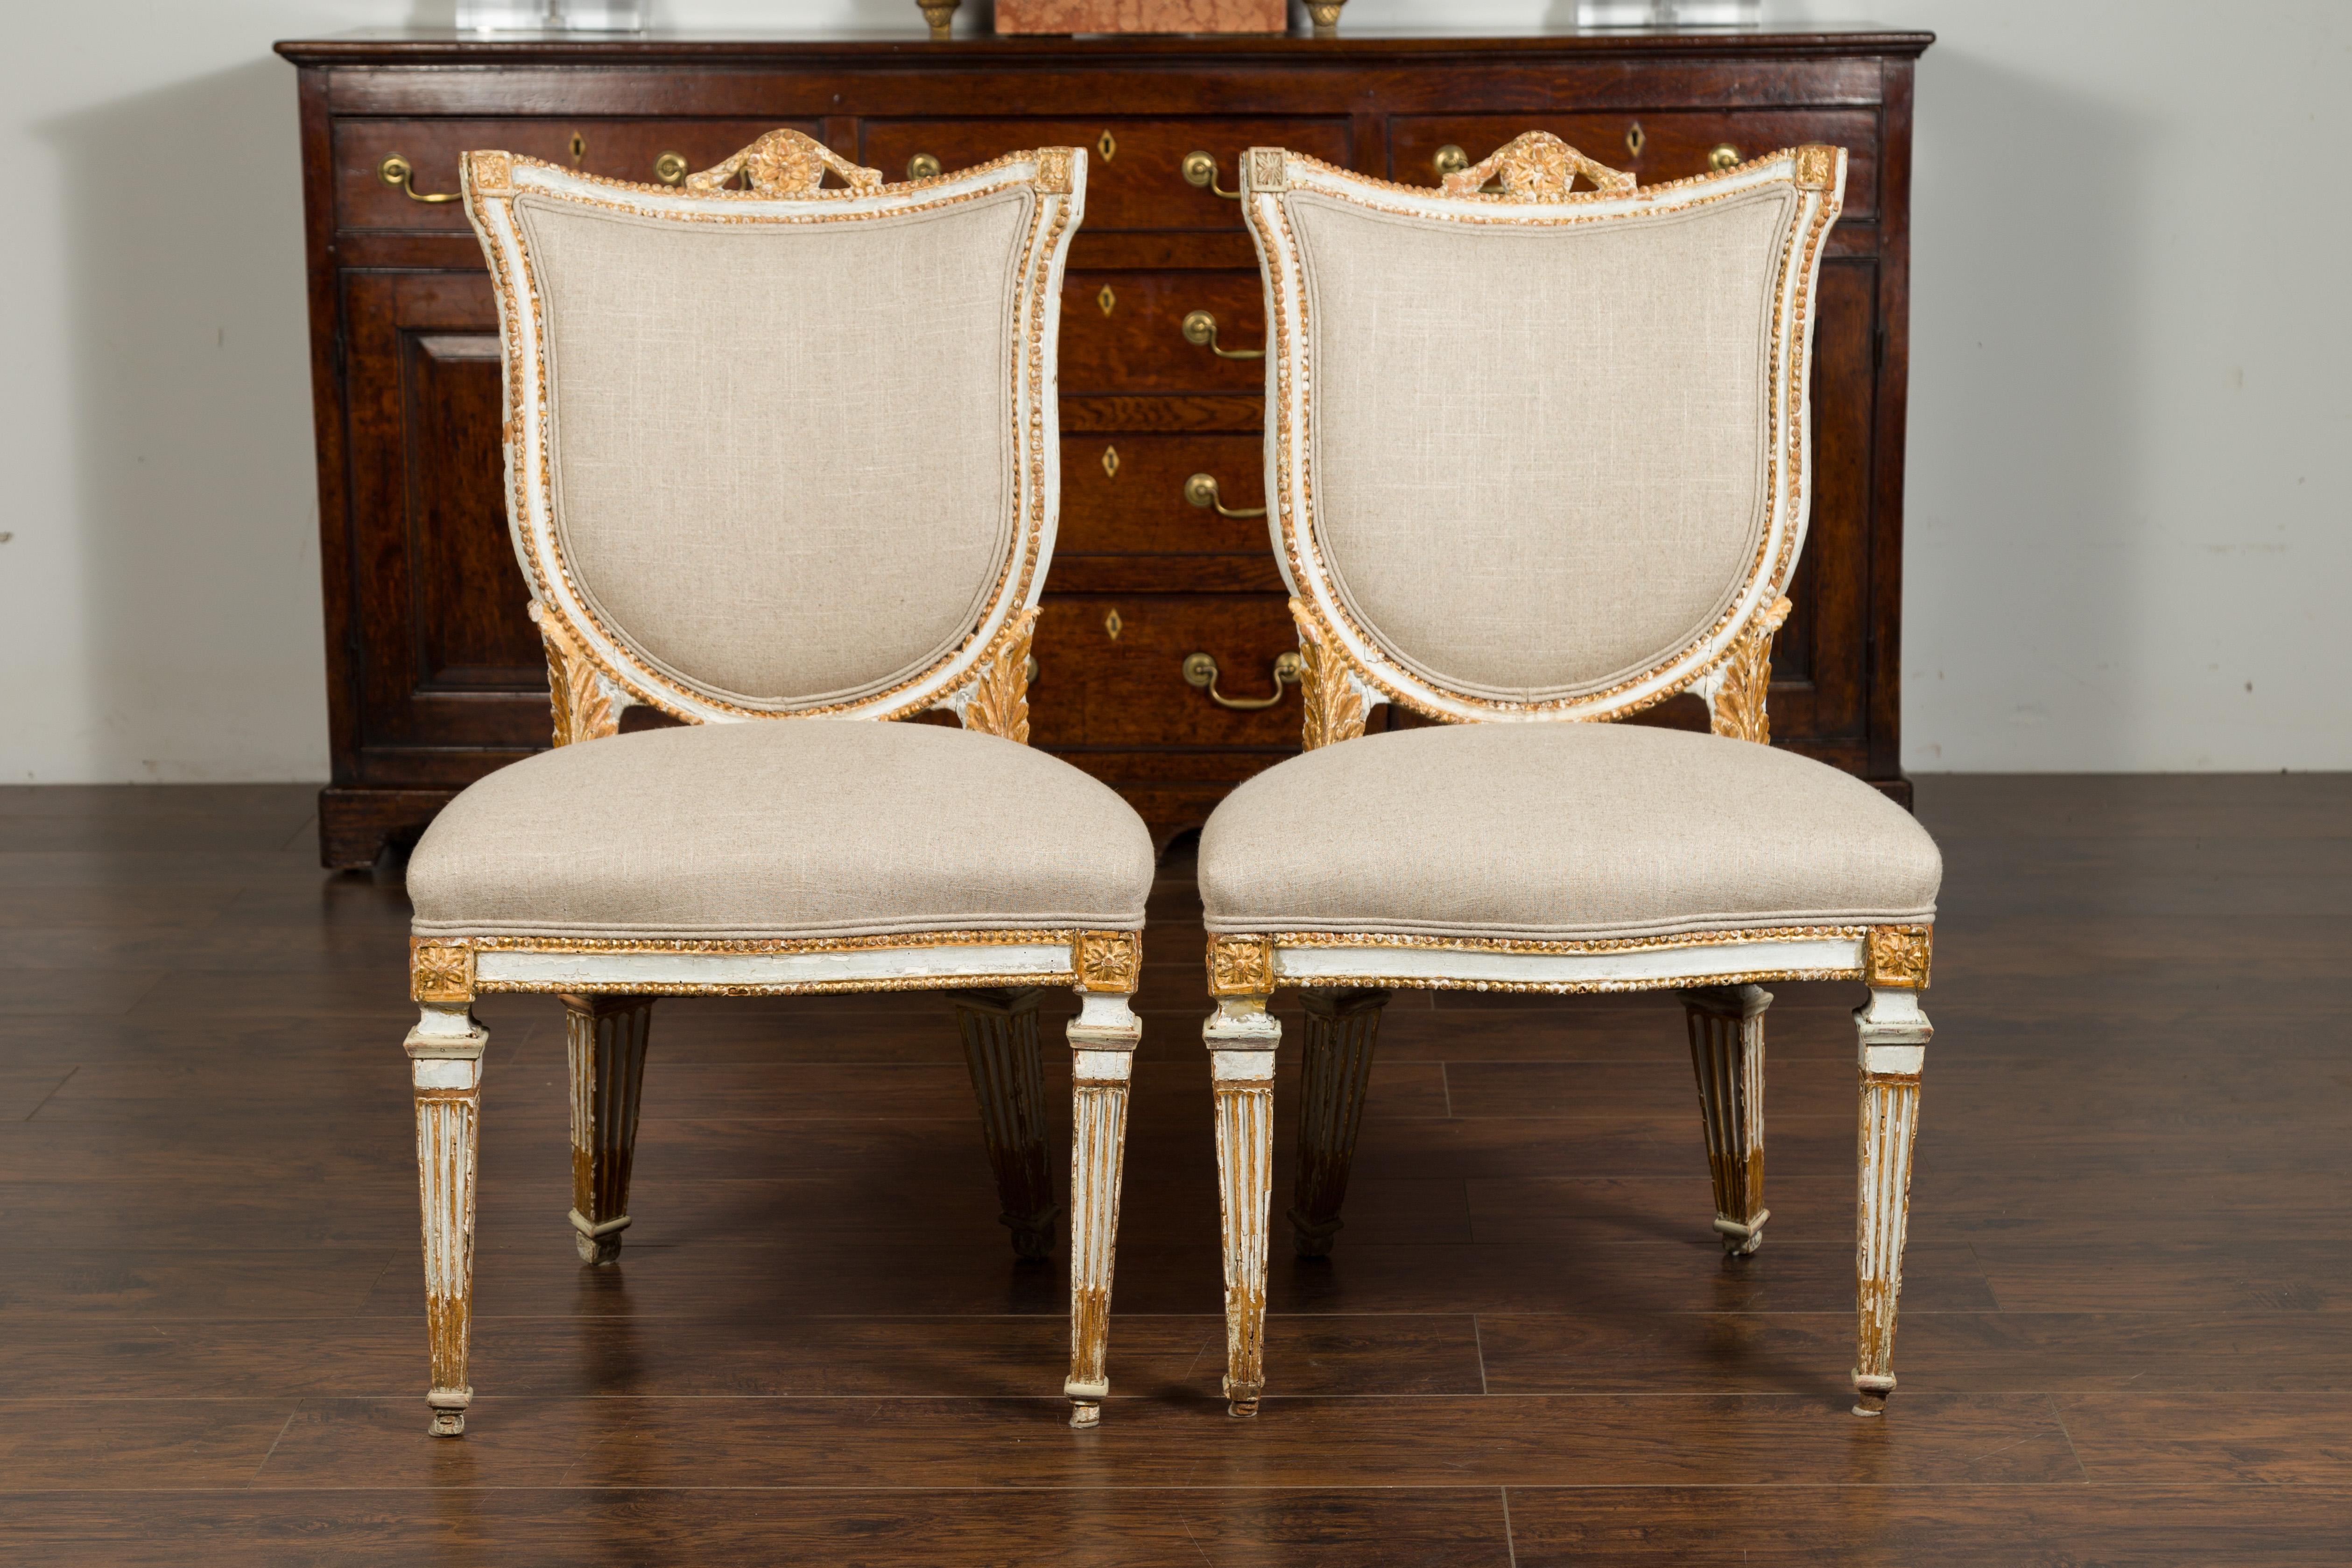 Pair of Italian Neoclassical Painted and Carved Side Chairs with Shield Backs For Sale 13